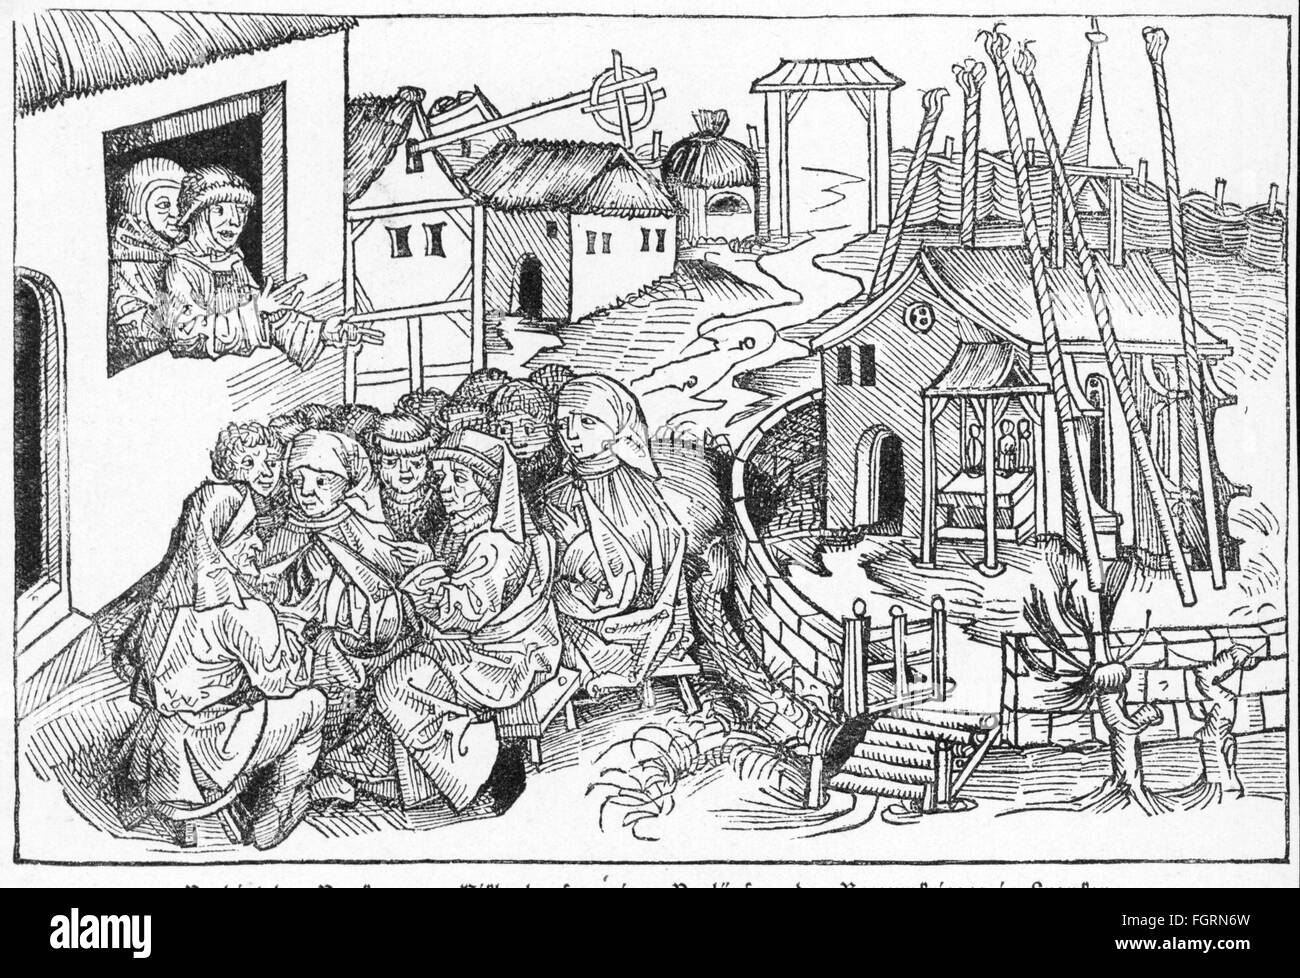 events, German Peasants' War 1524 / 1525, peasants swearing on the Bundschuh flag, woodcut, 1513, 16thh century, graphic, graphics, uprising, tied shoe, farmers, revolt, Peasants' War, Middle Ages, Germany, Swabia, conspiracy, alliance, Jesus Christ, crucifix, oath, oath of allegiance, rebels, insurgents, historic, historical, people, Additional-Rights-Clearences-Not Available Stock Photo